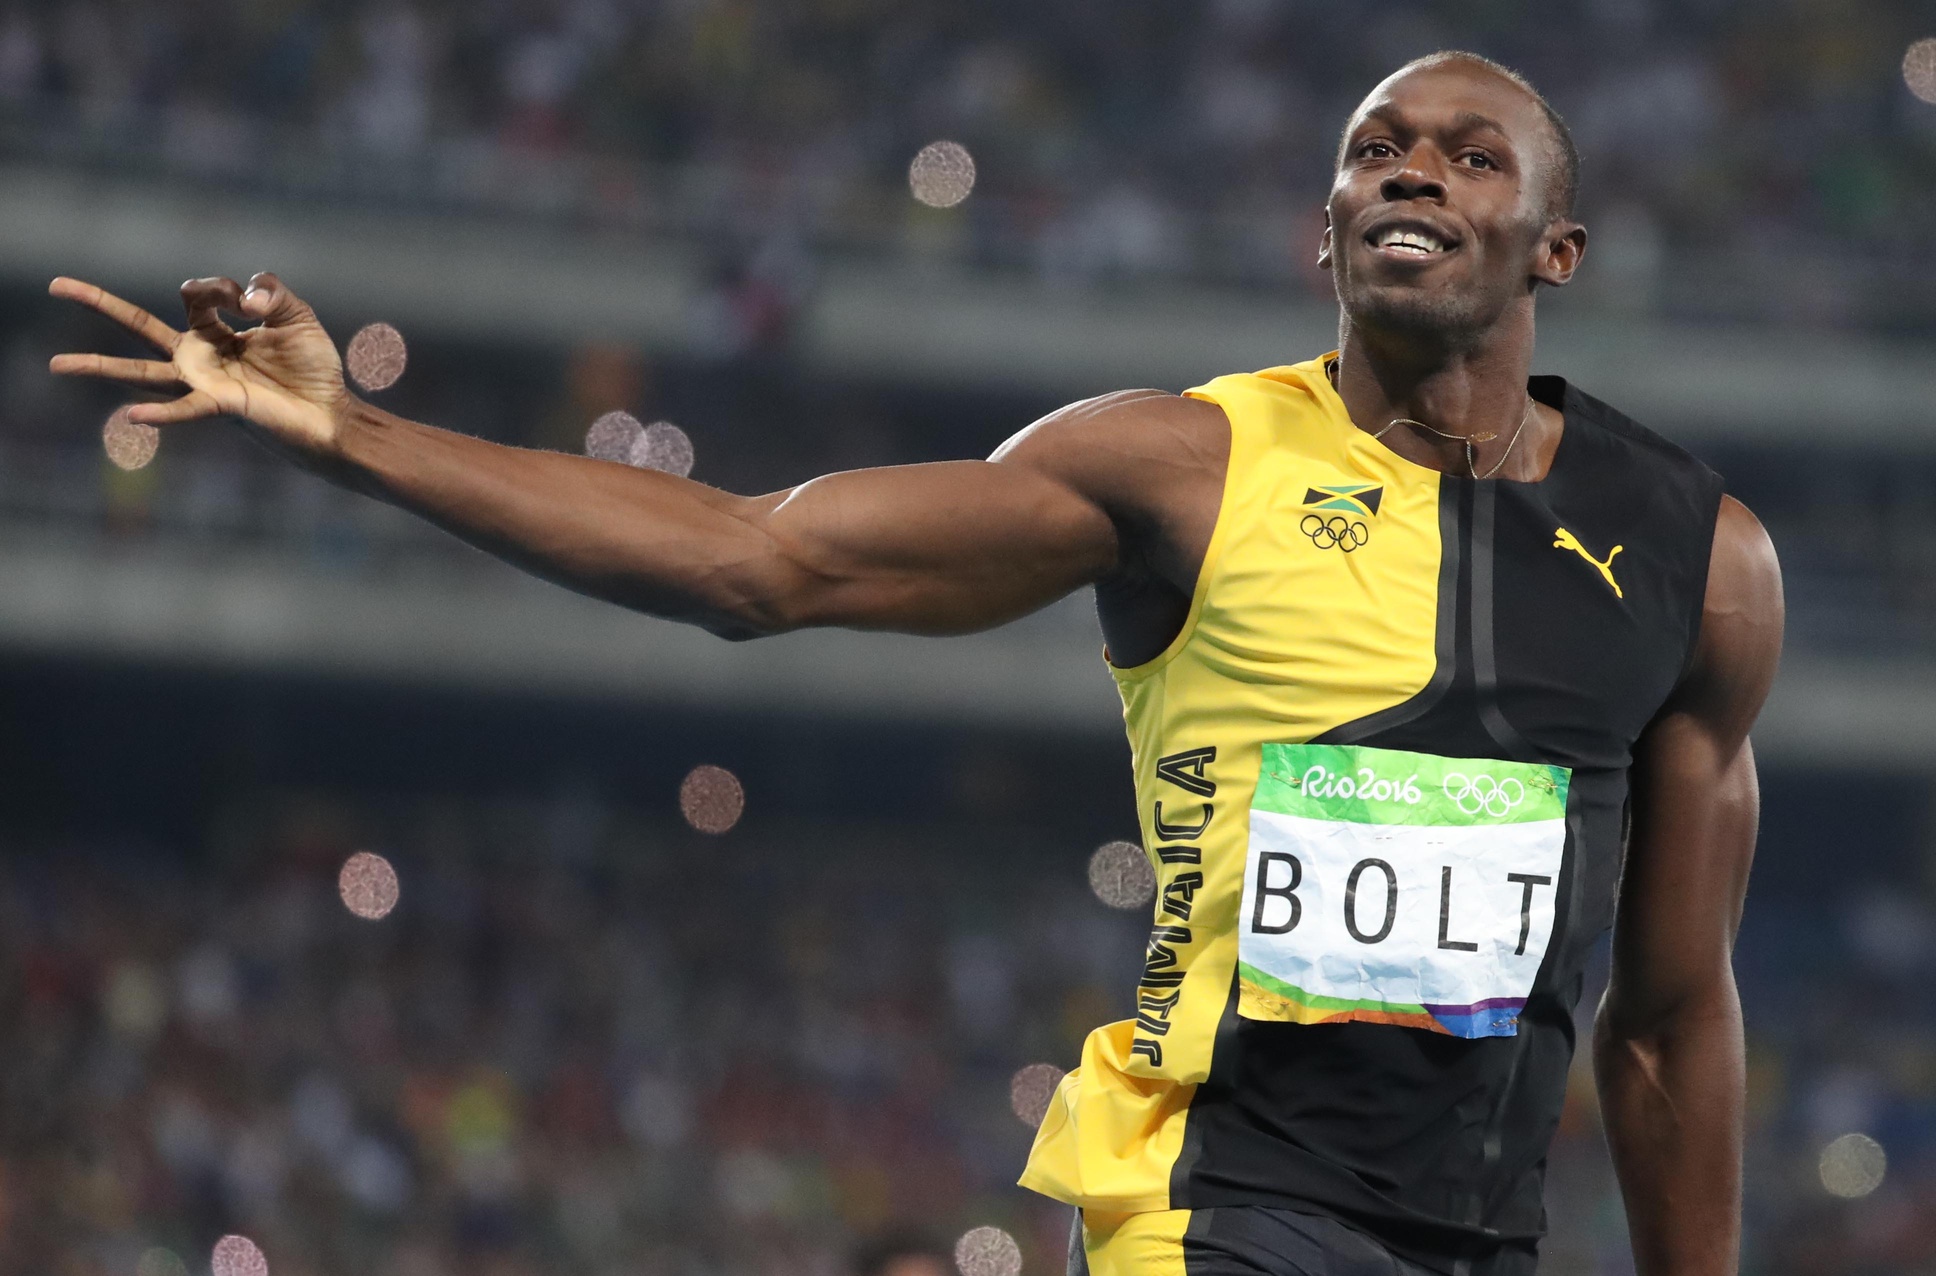 Would Usain Bolt Make For A Good NFL Wide Receiver? 3